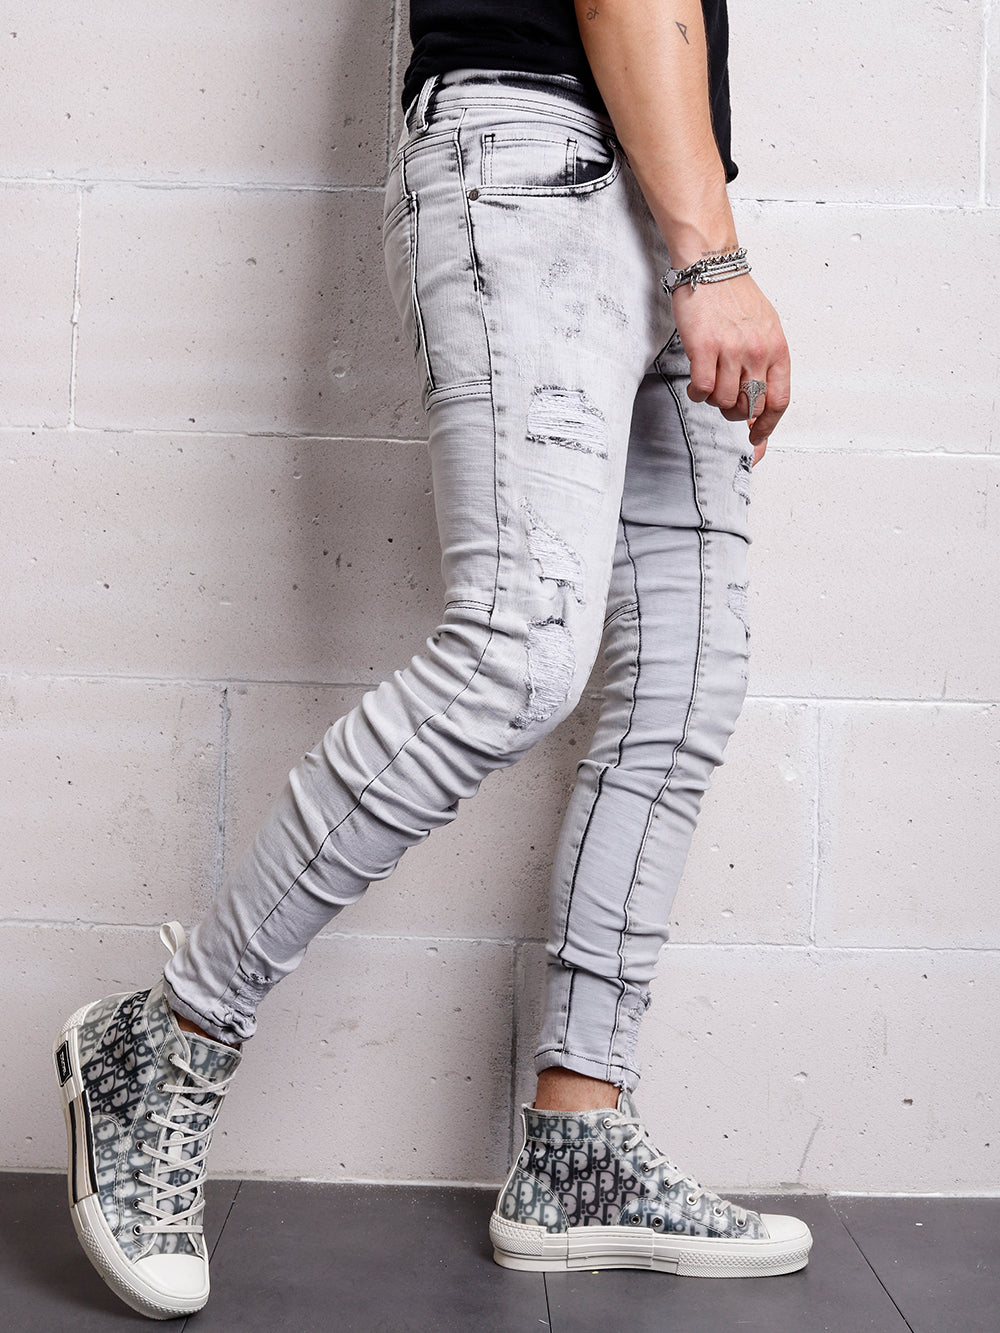 A man wearing distressed jeans and CLOUD 9 sneakers leaning against a wall.